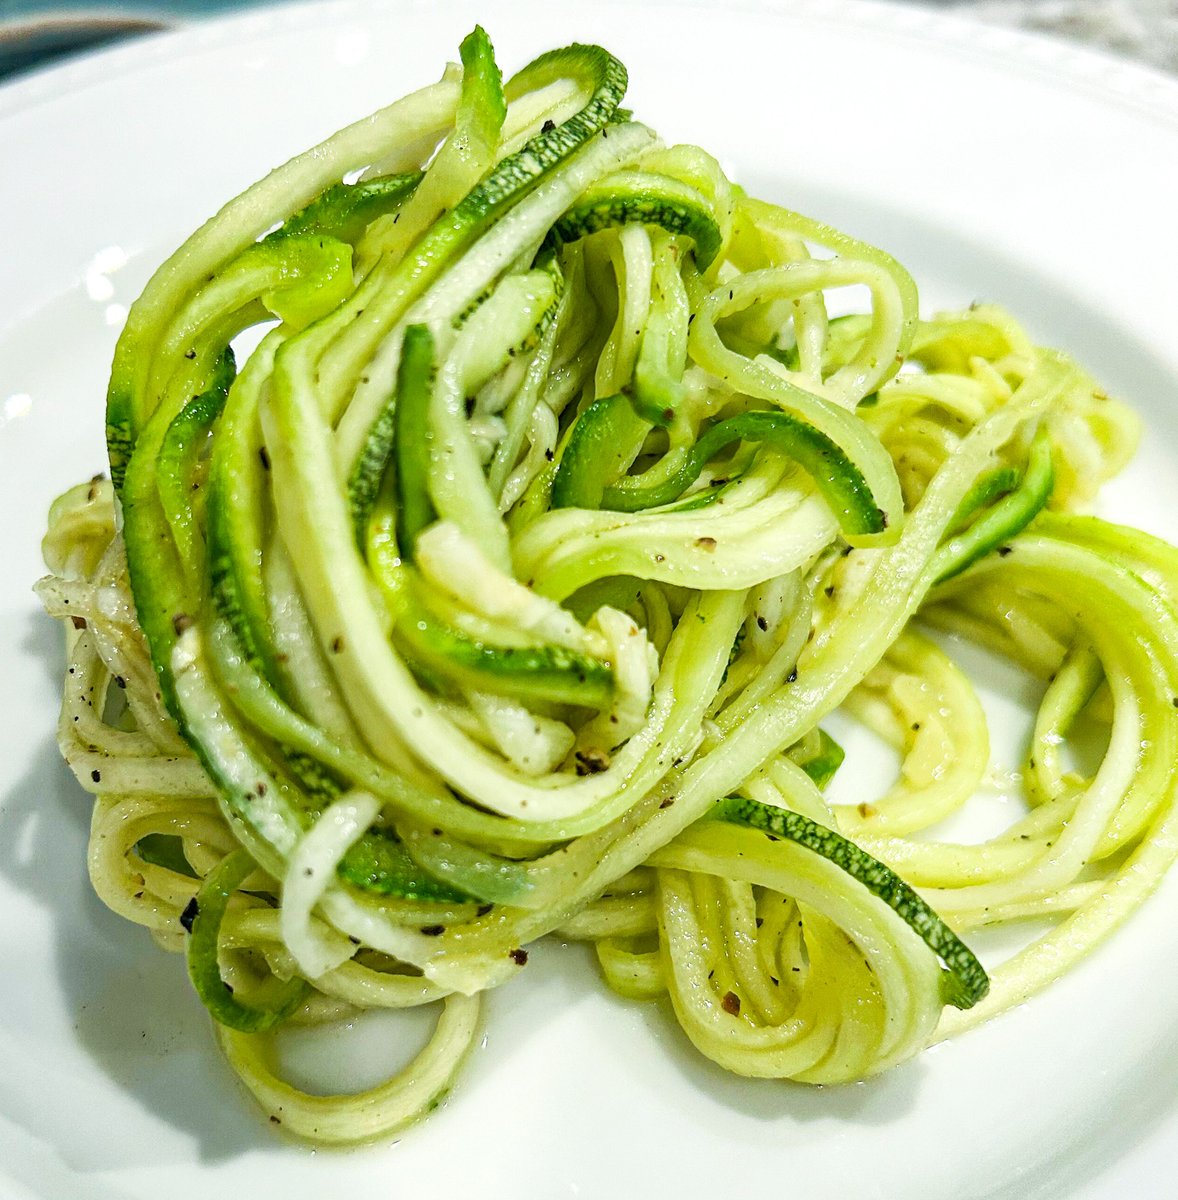 Did you know that Zoodles are Zucchini Noodles? What is your favorite way to eat this spiralized vegetable? Comment below or post a photo of how you serve Zoodles in your home. #zoodles #lowcarbinspo #spiralizedveggies #summersquash